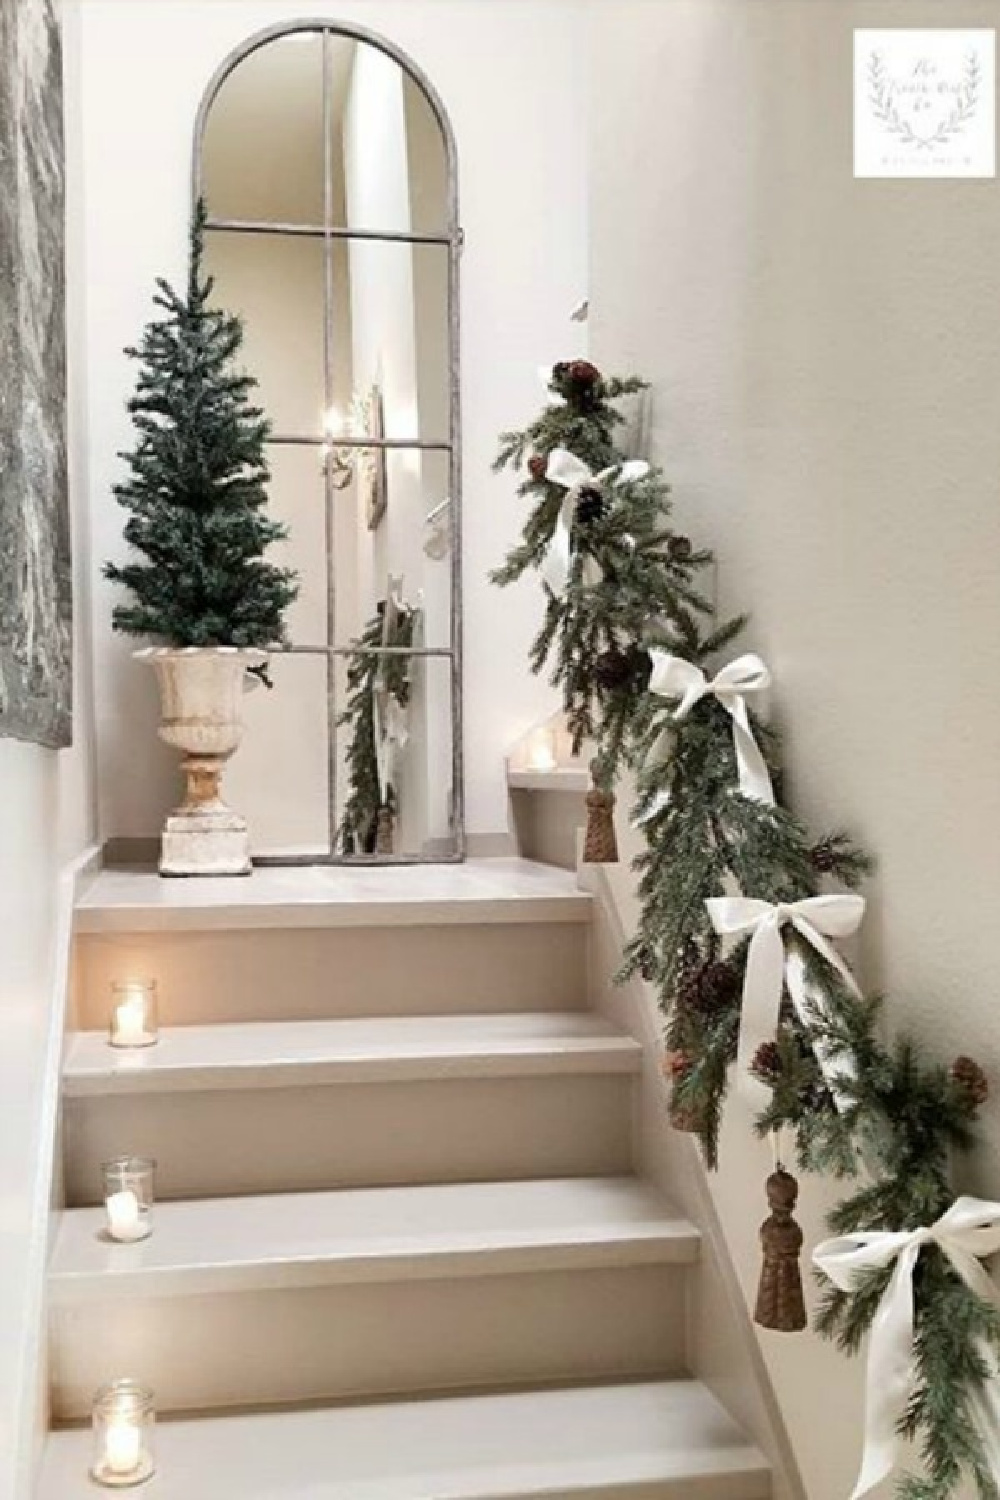 French Christmas decorating ideas from an amazing house tour of country French design from The French Nest Co. #christmasdecor #frenchcountry #frenchfarmhouse #frenchchristmas #whitechristmas